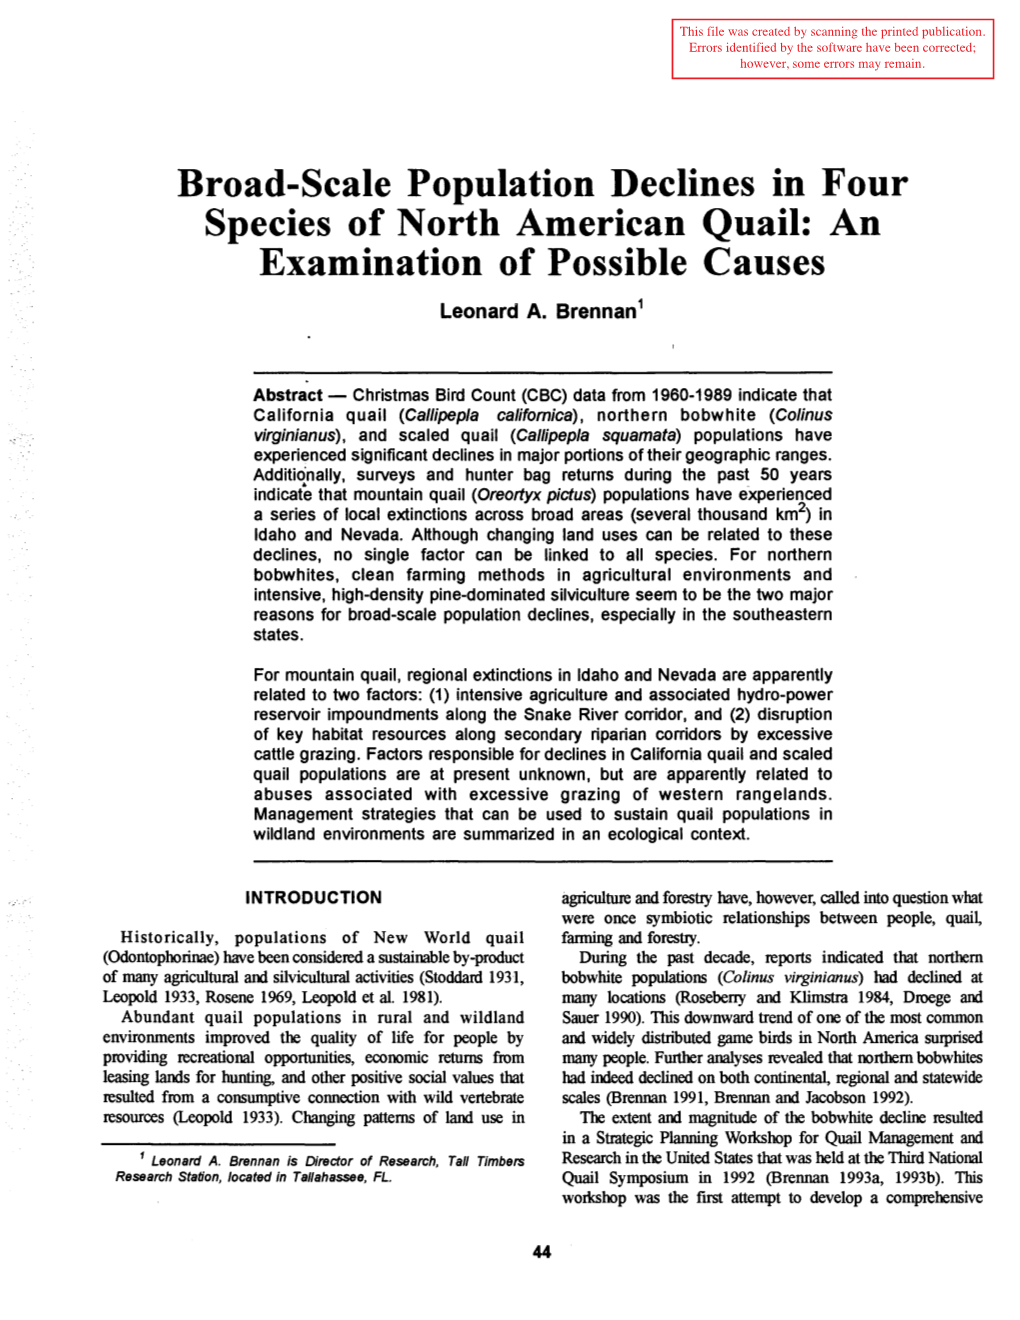 Broad-Scale Population Declines in Four Species of North American Quail: an Examination of Possible Causes Leonard A